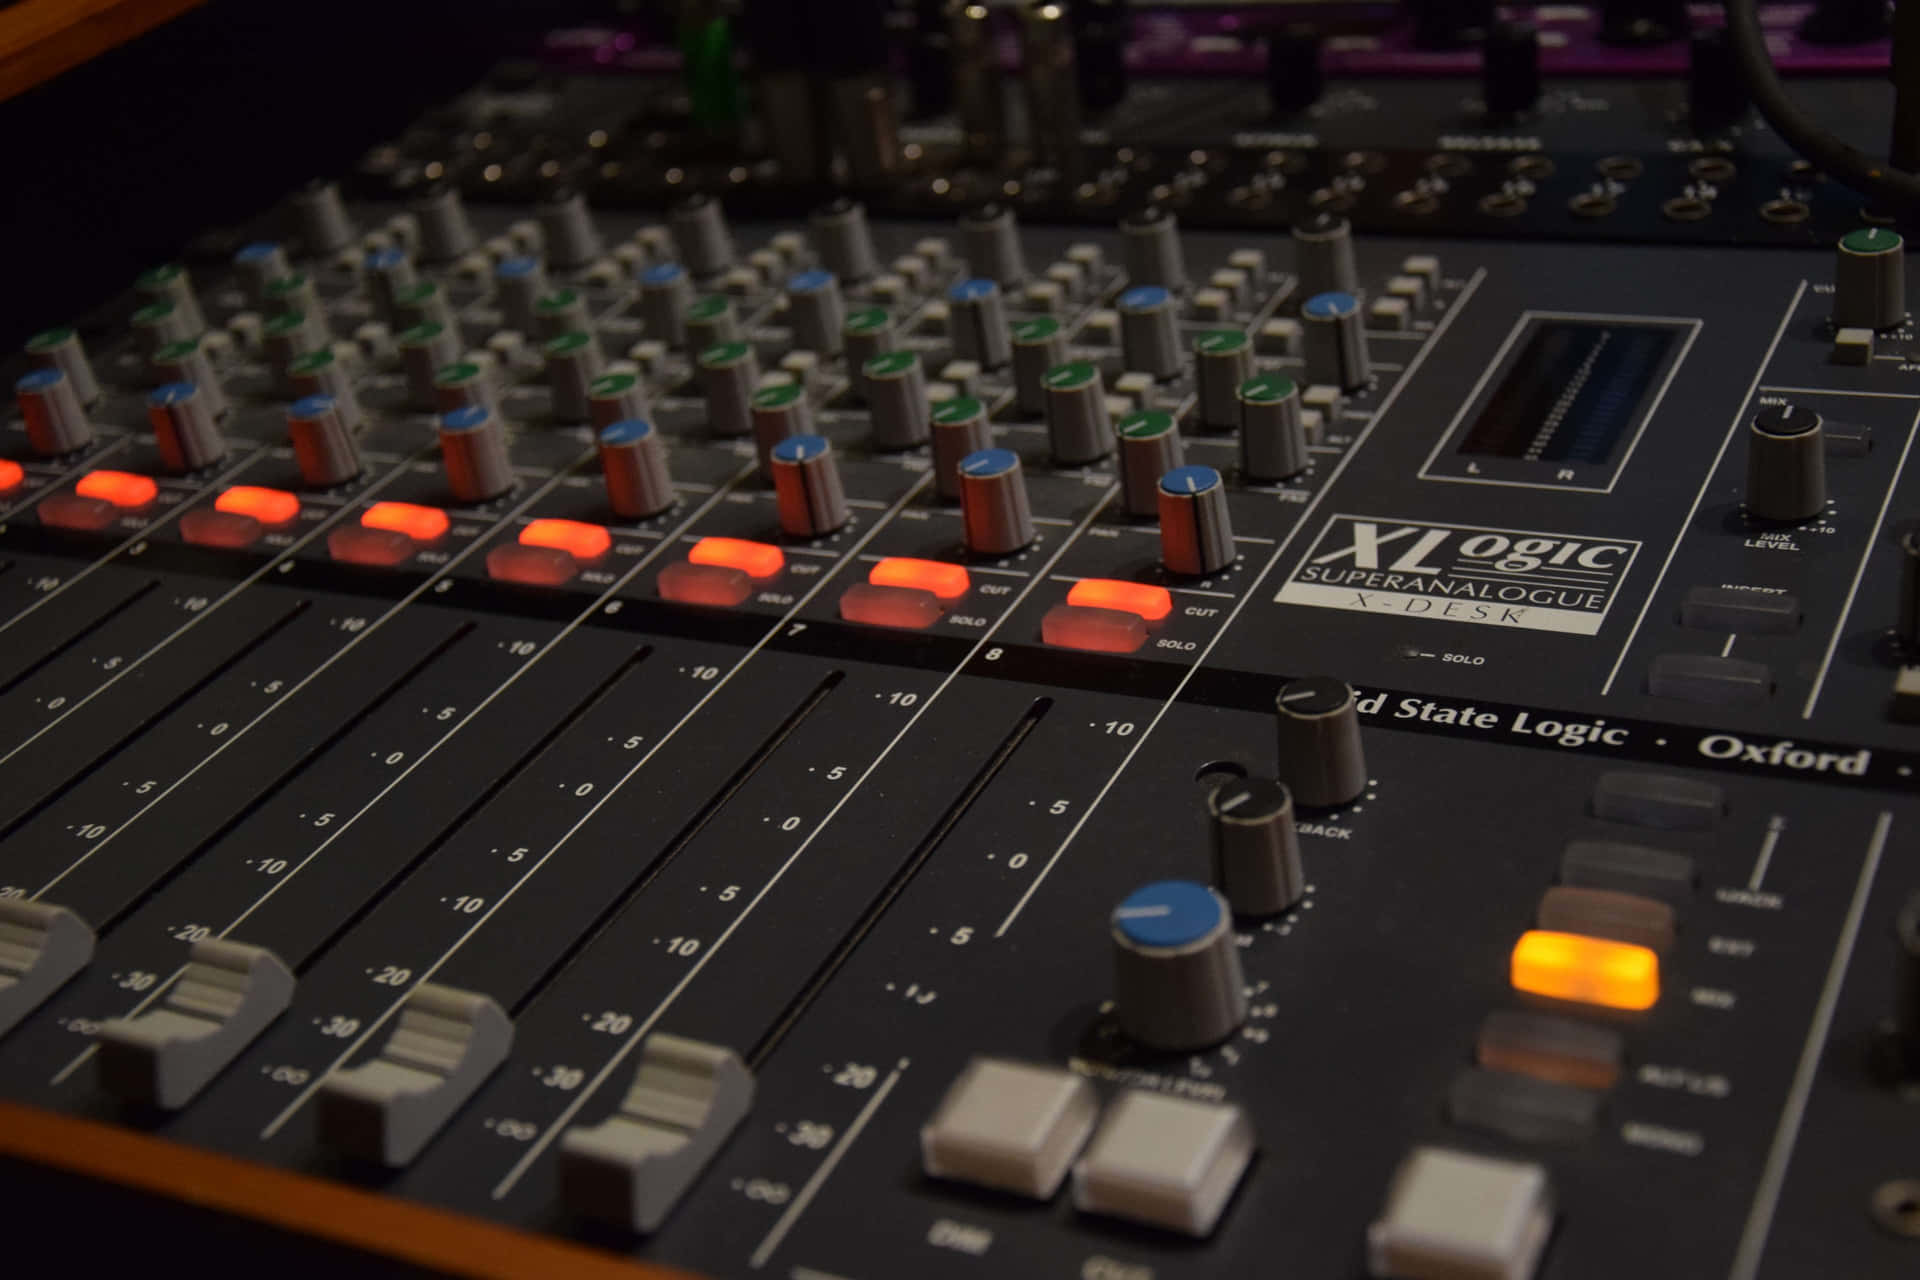 Professional Audio Mixing Console